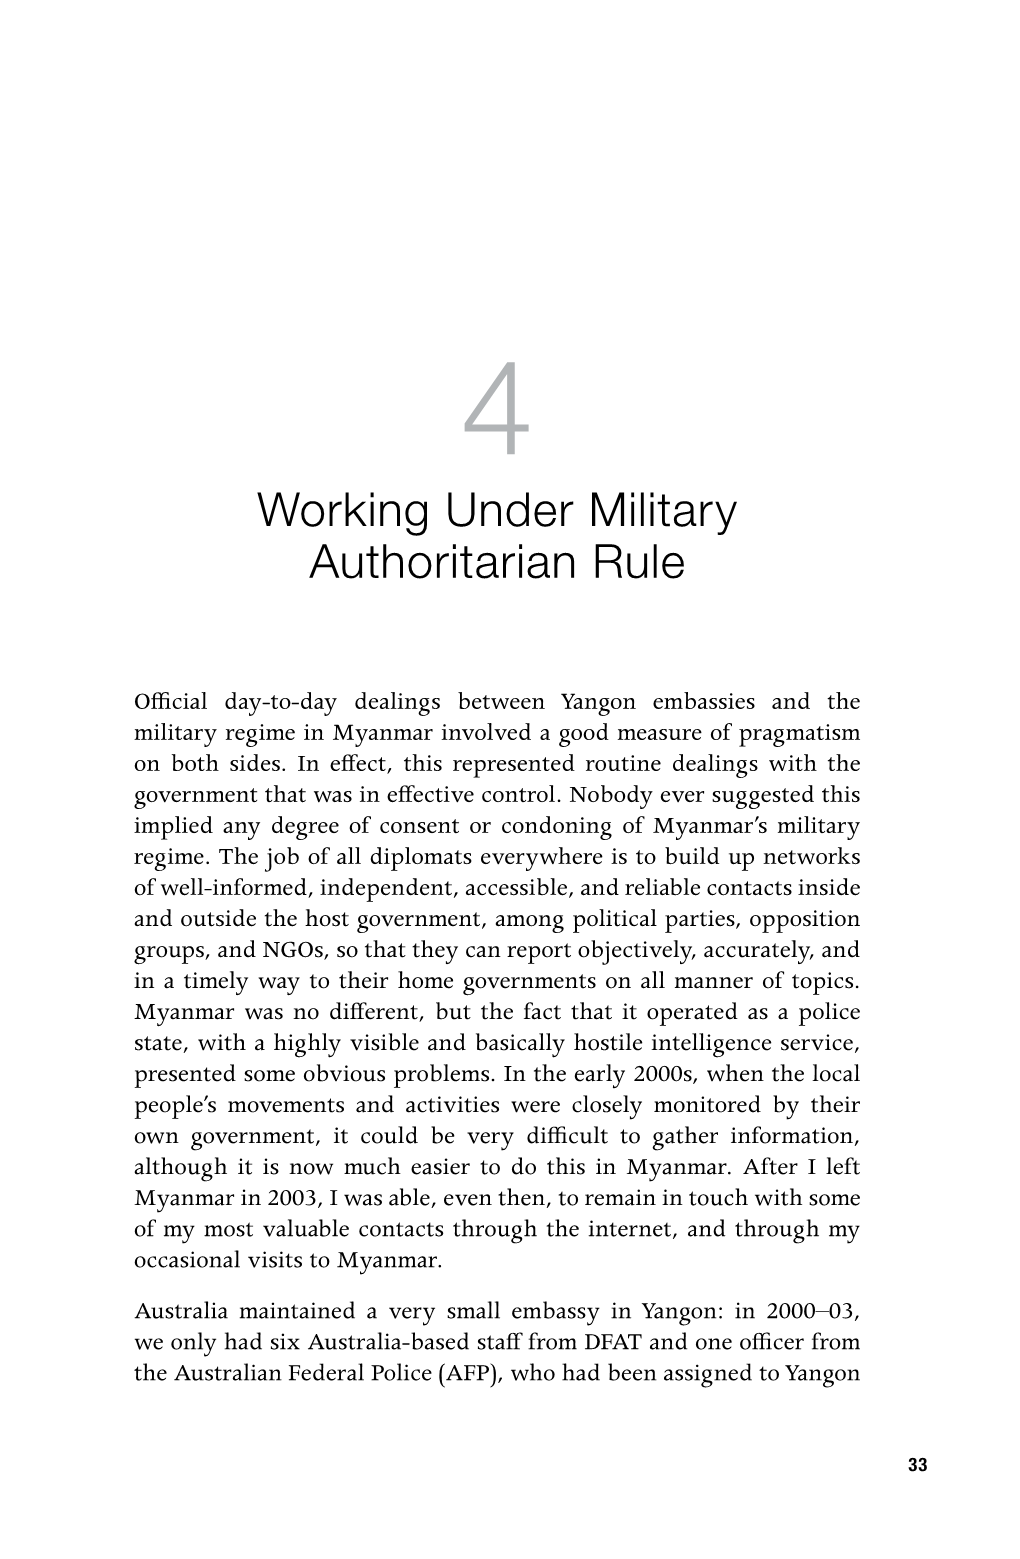 Working Under Military Authoritarian Rule